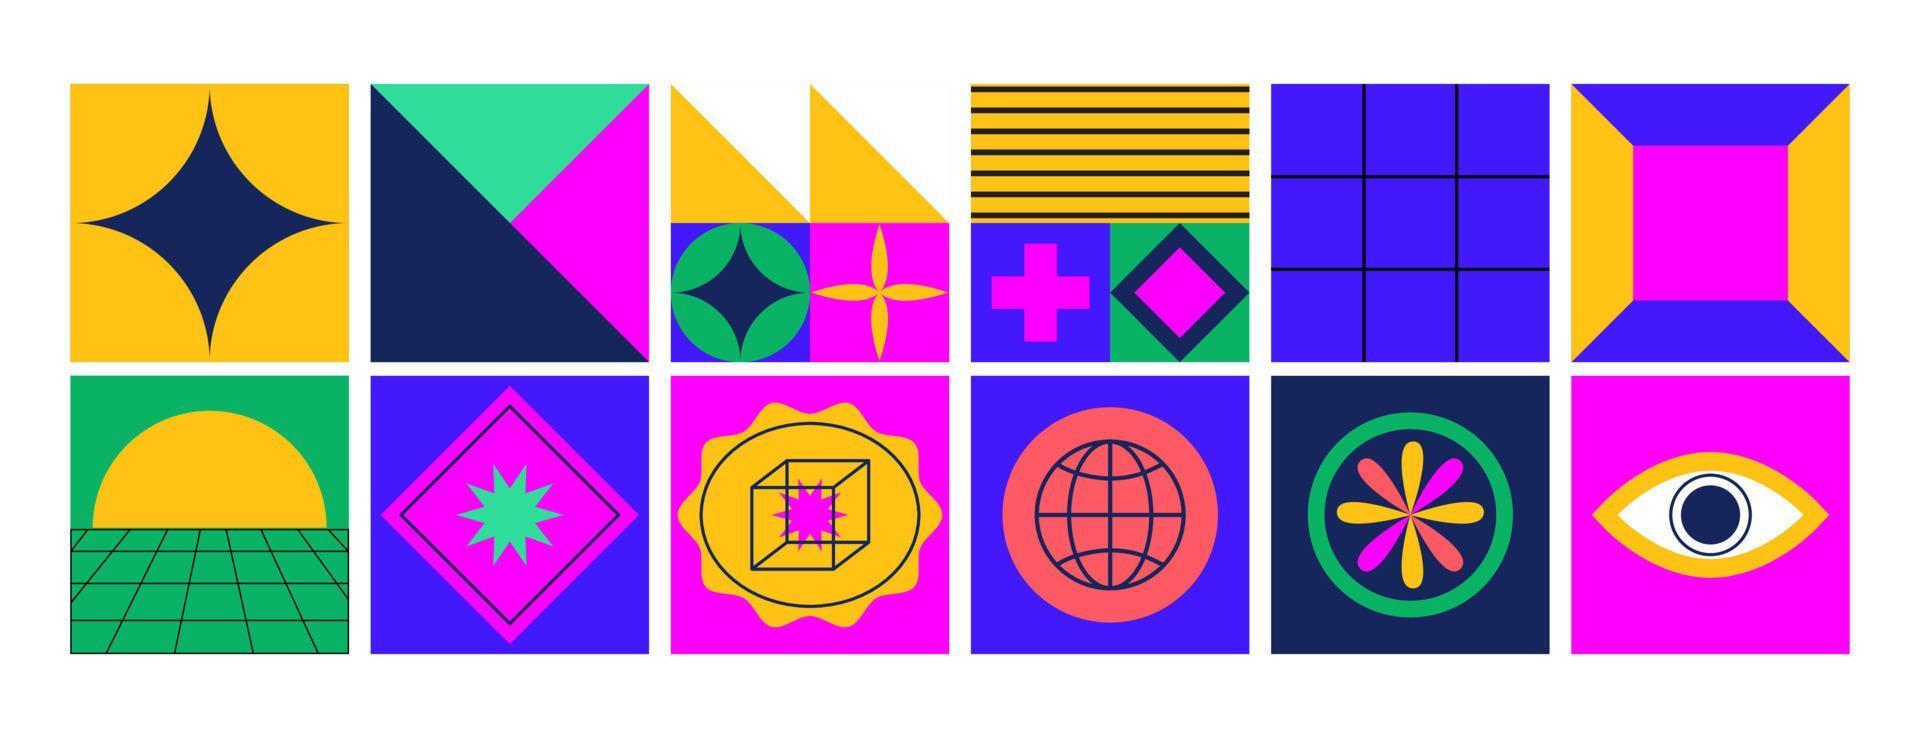 Retro abstract geometric shapes, patches, badges. Sticker pack. Trendy graphic futuristic elements. Y2k, 70s, 80s, 90s vintage aesthetic. vector